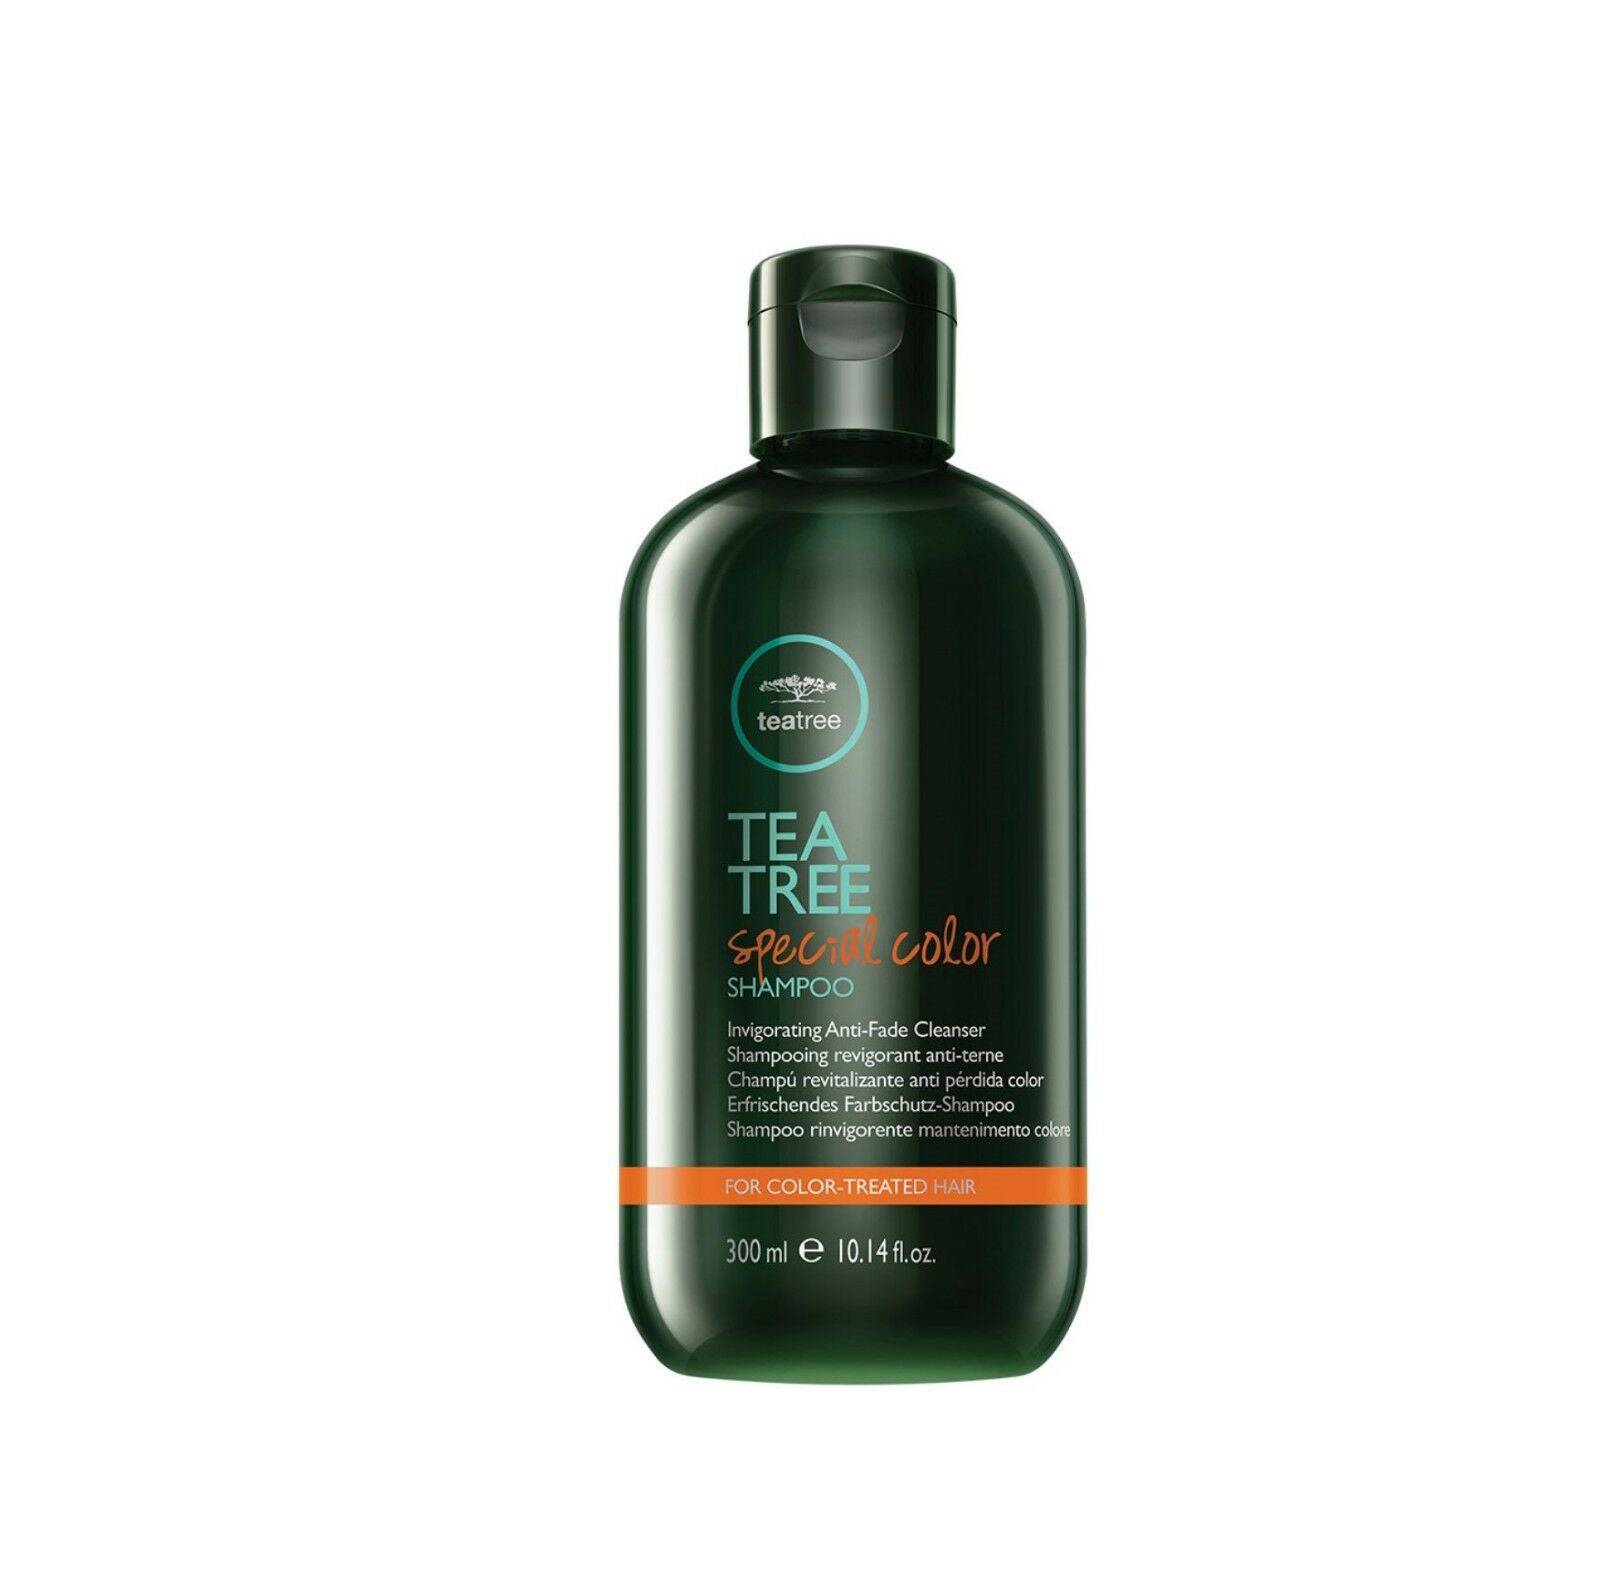 Paul Mitchell Tea Tree Special Color anti fade Shampoo and Conditioner 300ml Duo - On Line Hair Depot